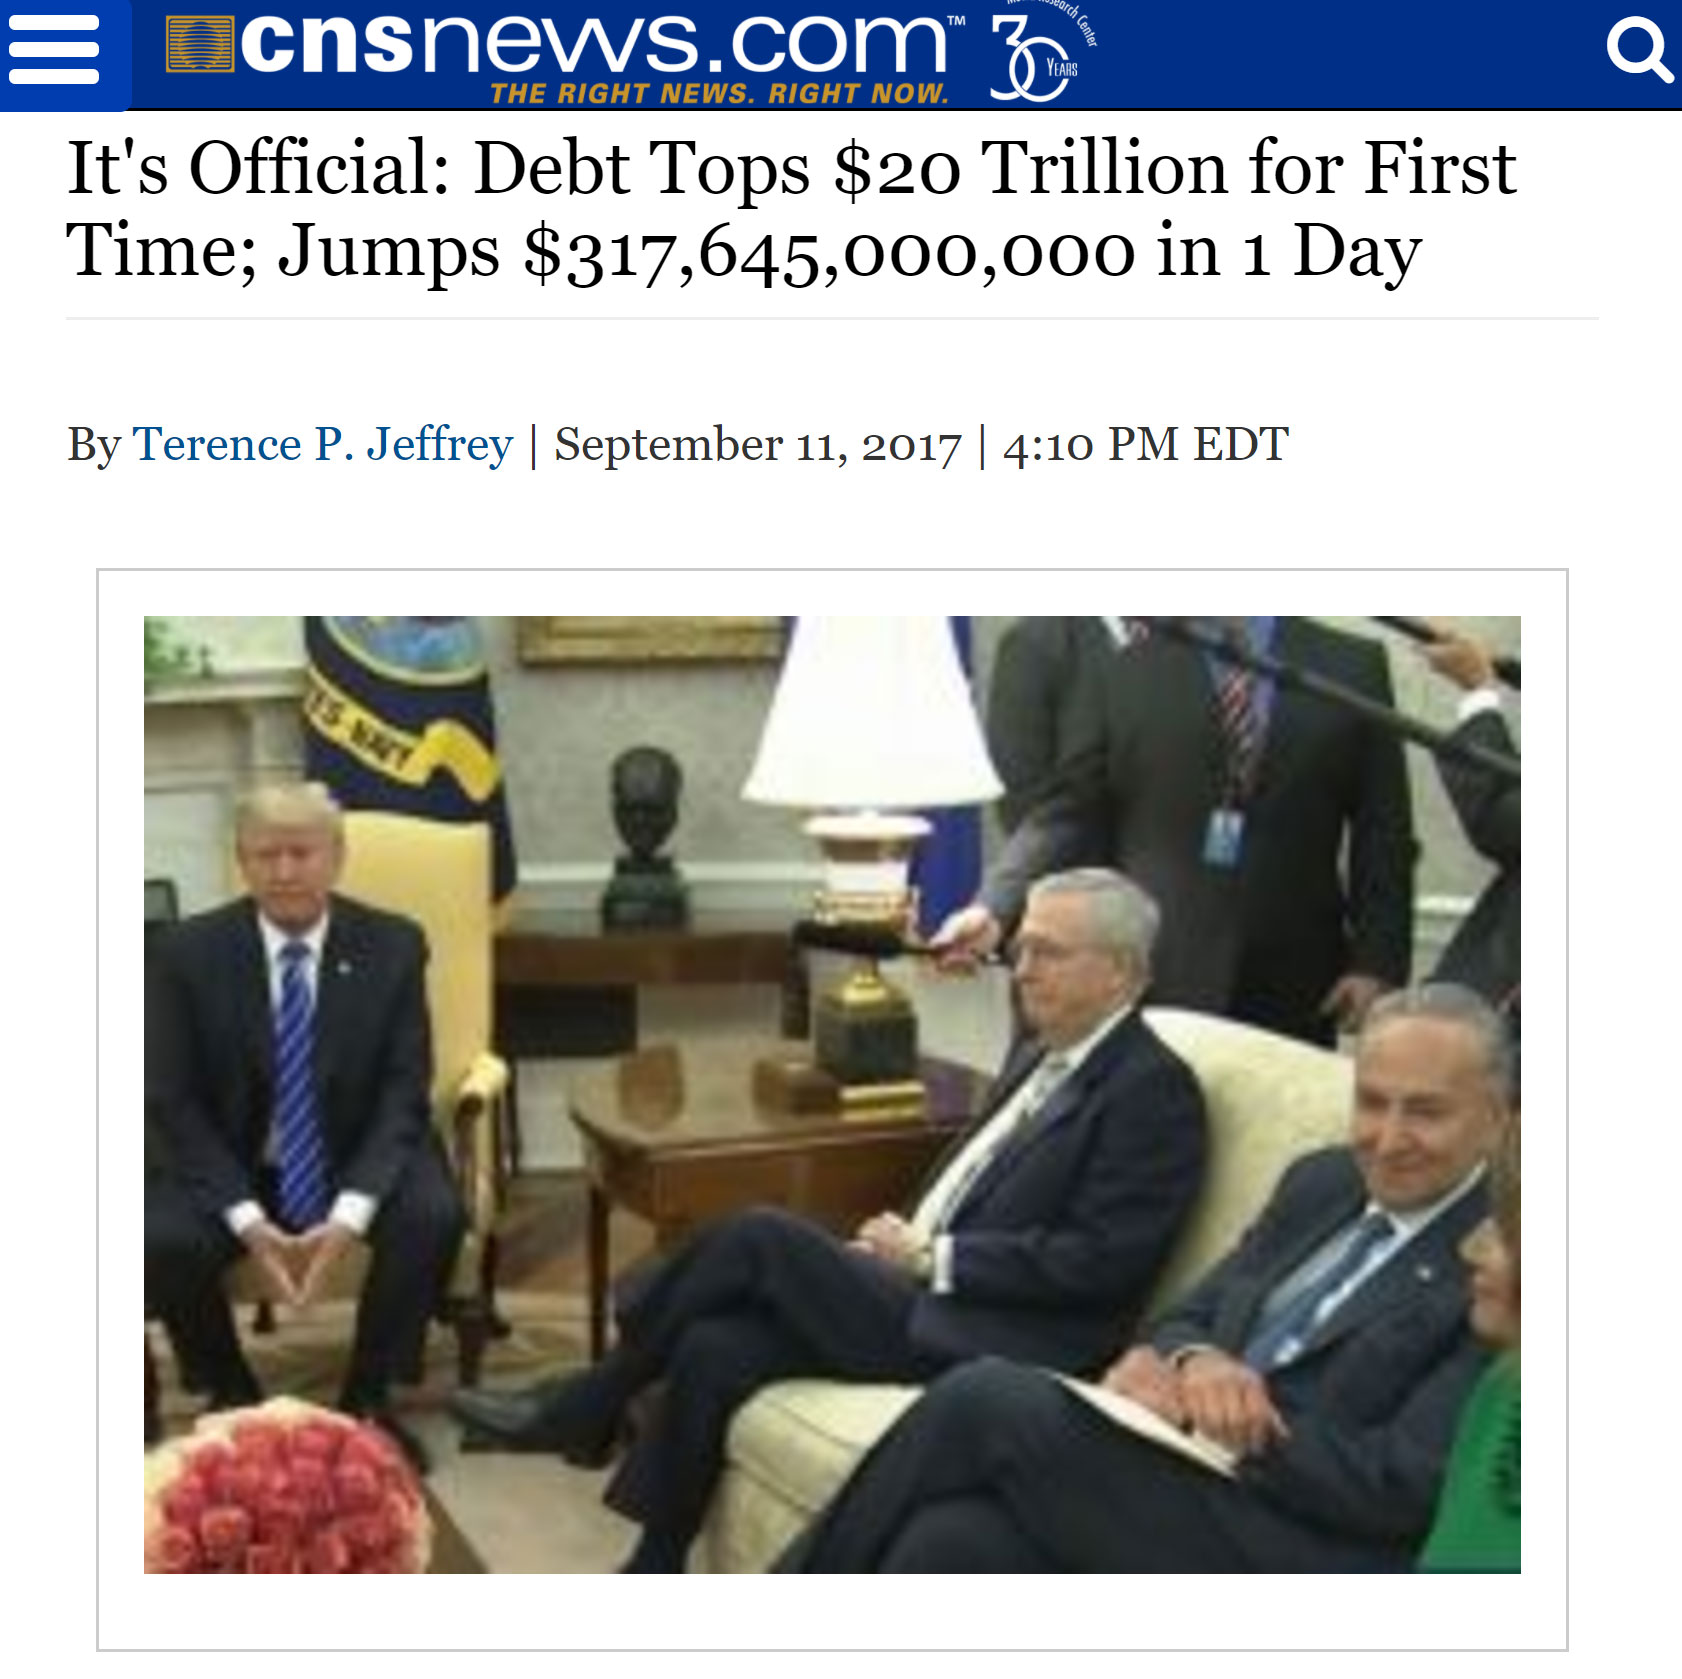 18-Debt-Tops-$20-Trillion-for-First-Time.jpg